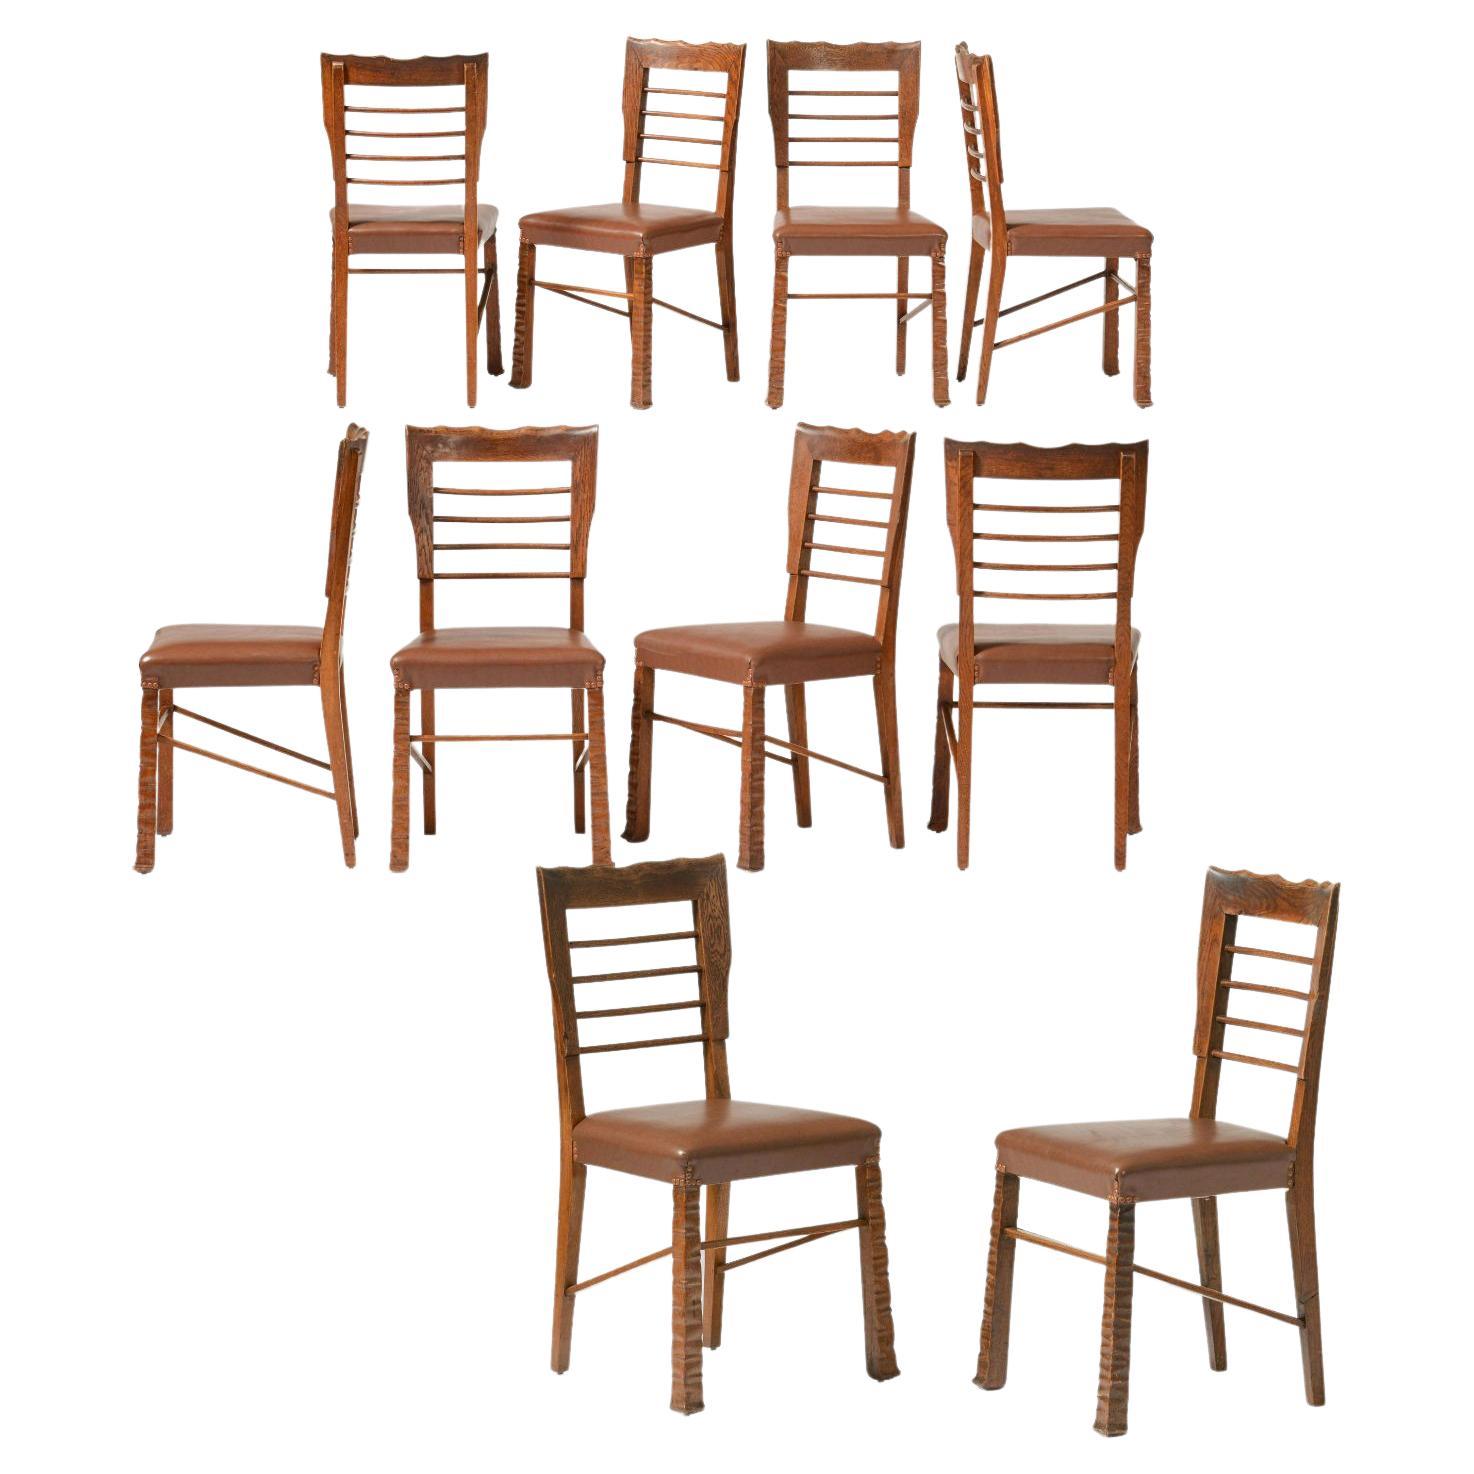 Vittorio Valabrega Rustic Scalloped Edge Dining Chairs, Set of 10, Italy, 1940's